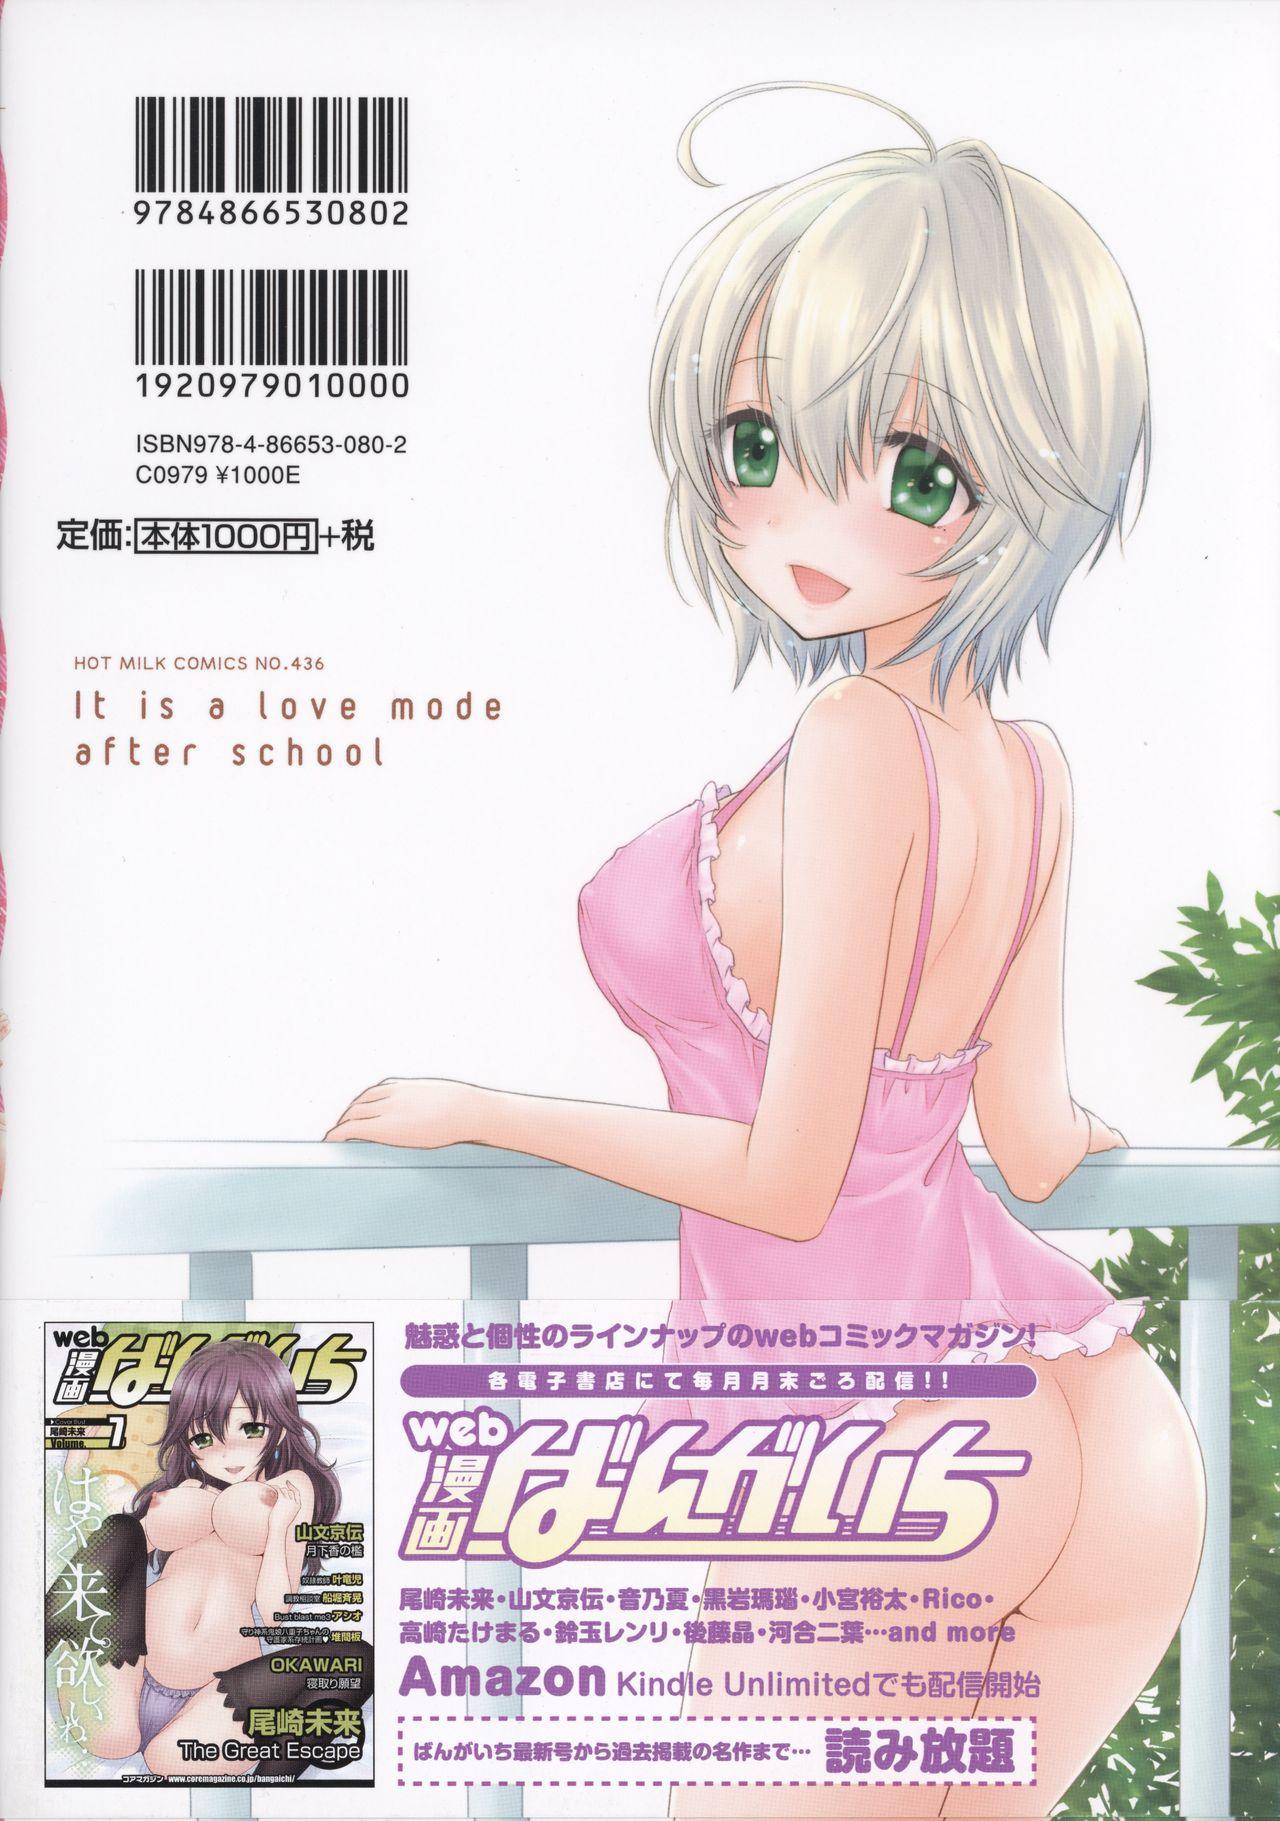 Houkago Love Mode - It is a love mode after school 226